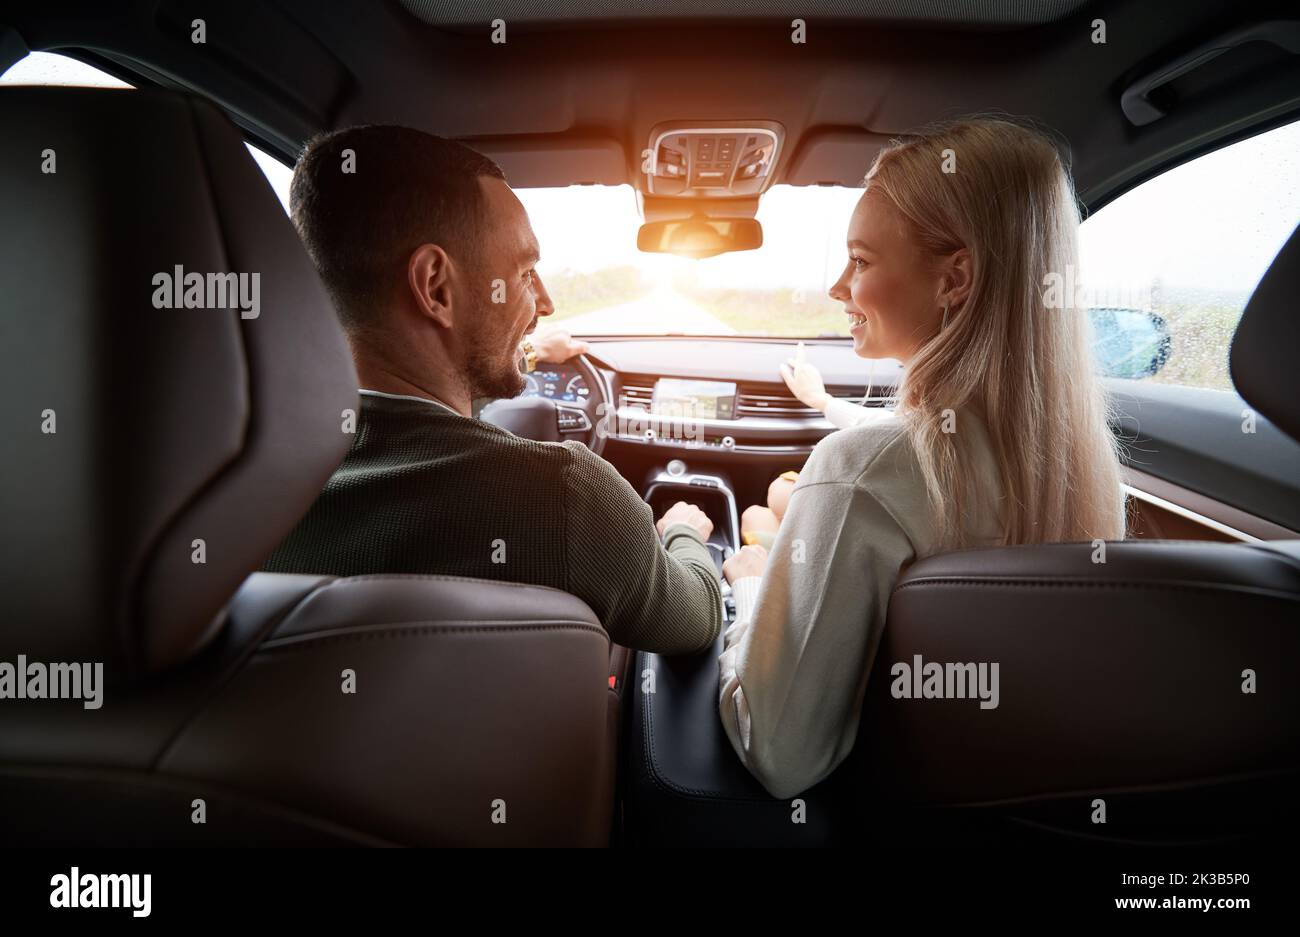 Back view of happy two people inside comfortable car. Joyful driver and cheerful female blonde in the front seat, sincerely smiling and looking at each other. Pleasant atmosphere during auto trip. Stock Photo